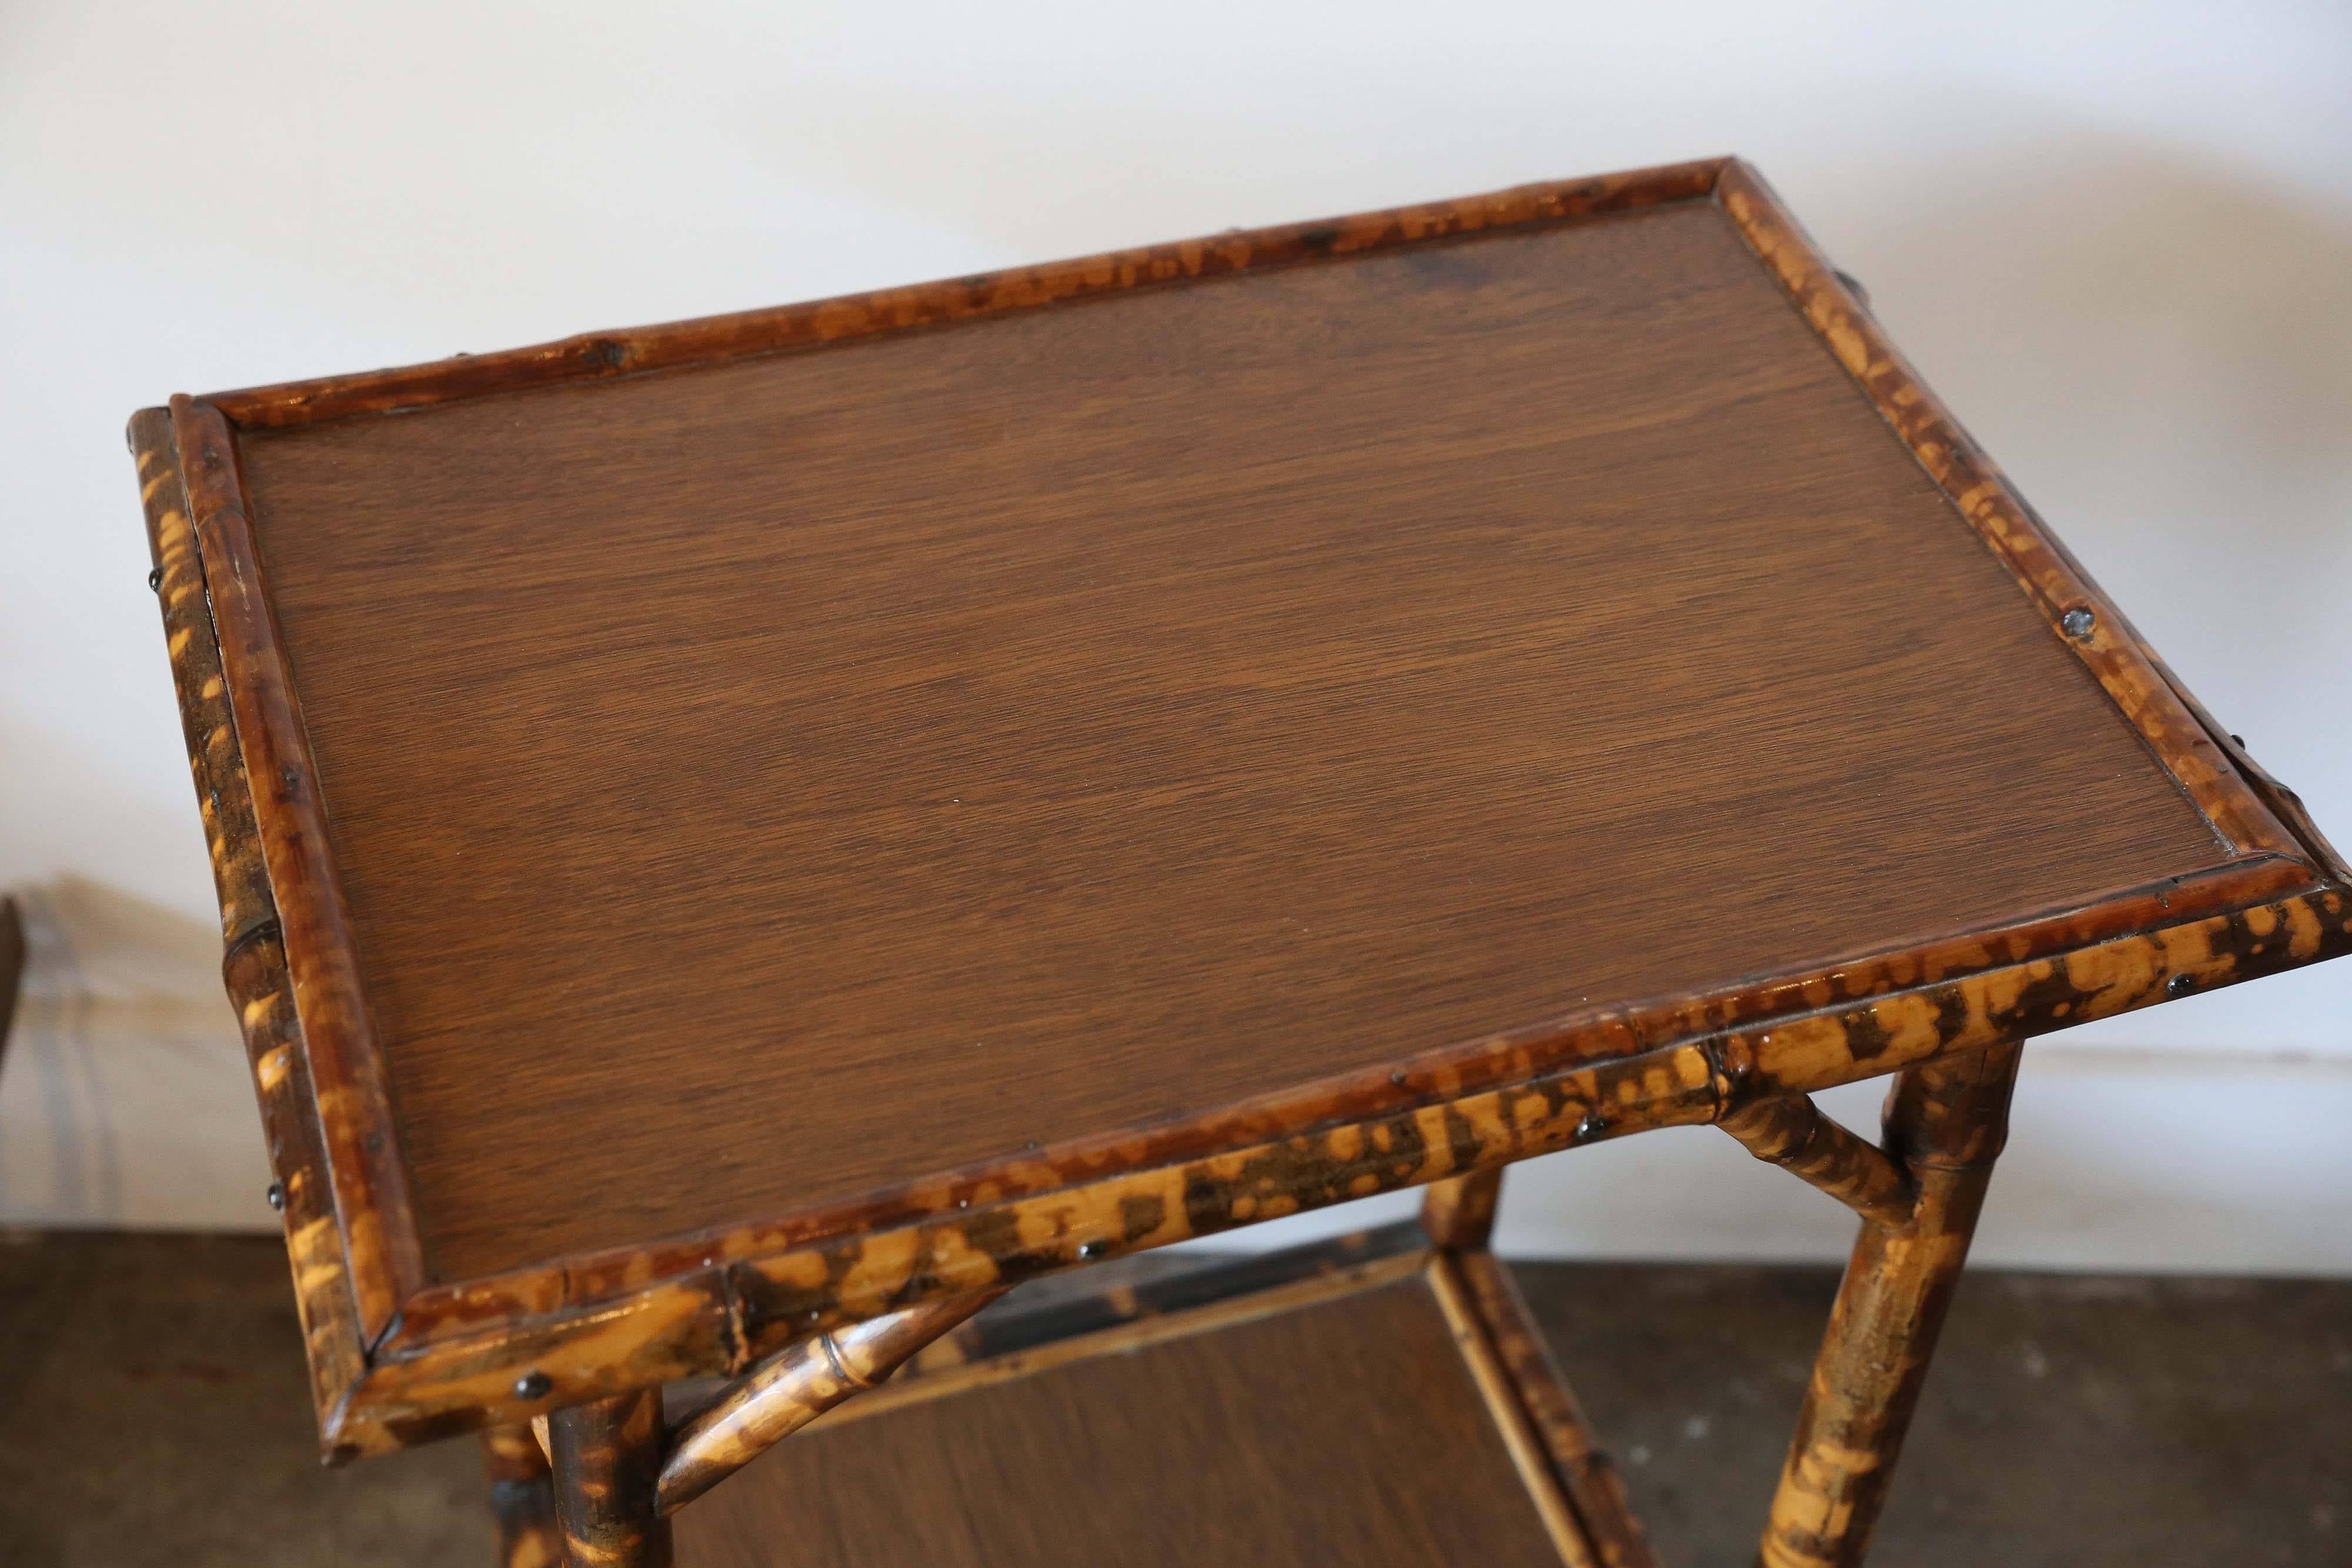 19th century scorched bamboo tortoise shell colored table with two levels.